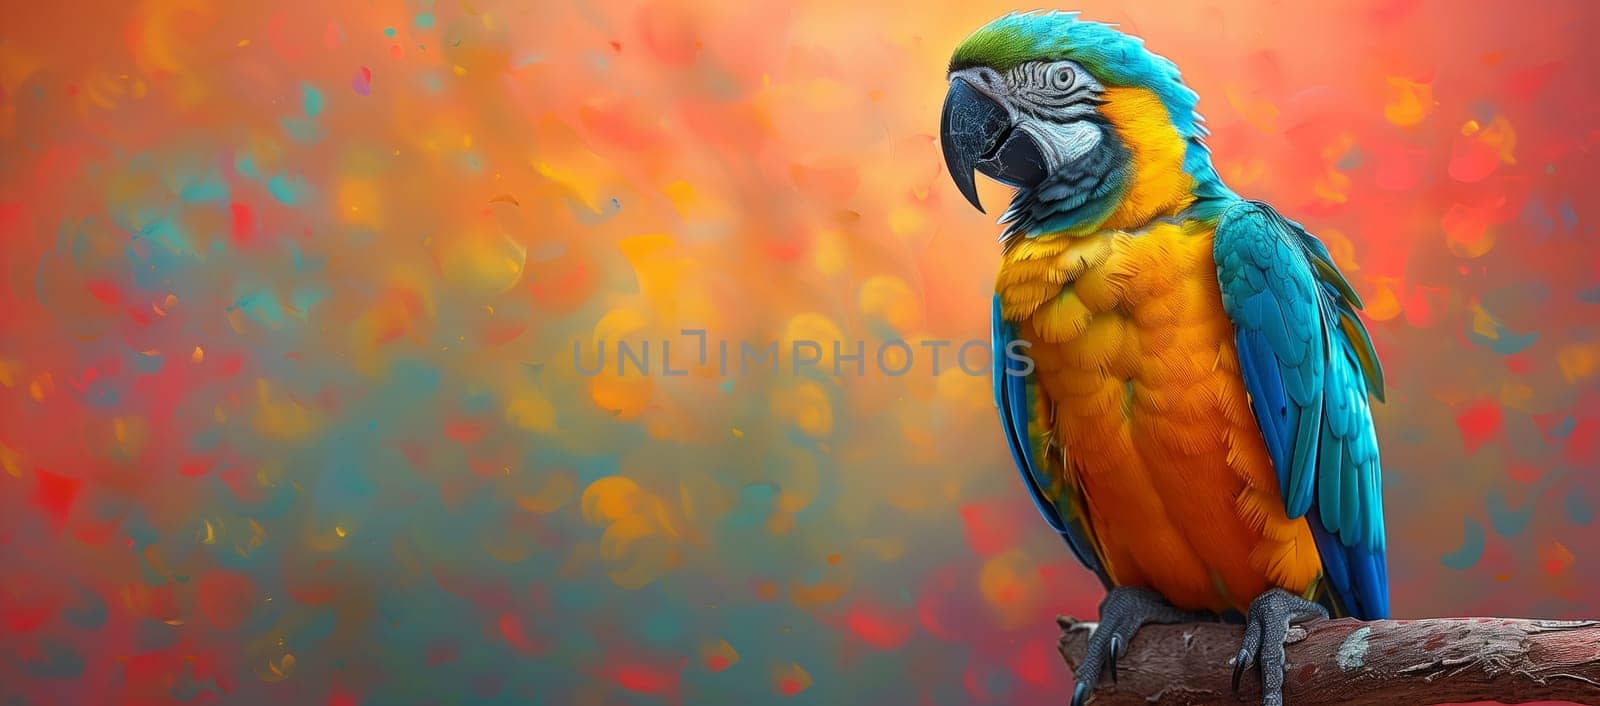 A vibrant Macaw parrot with colorful feathers perched gracefully on a tree branch, showcasing its beautiful beak and majestic wings